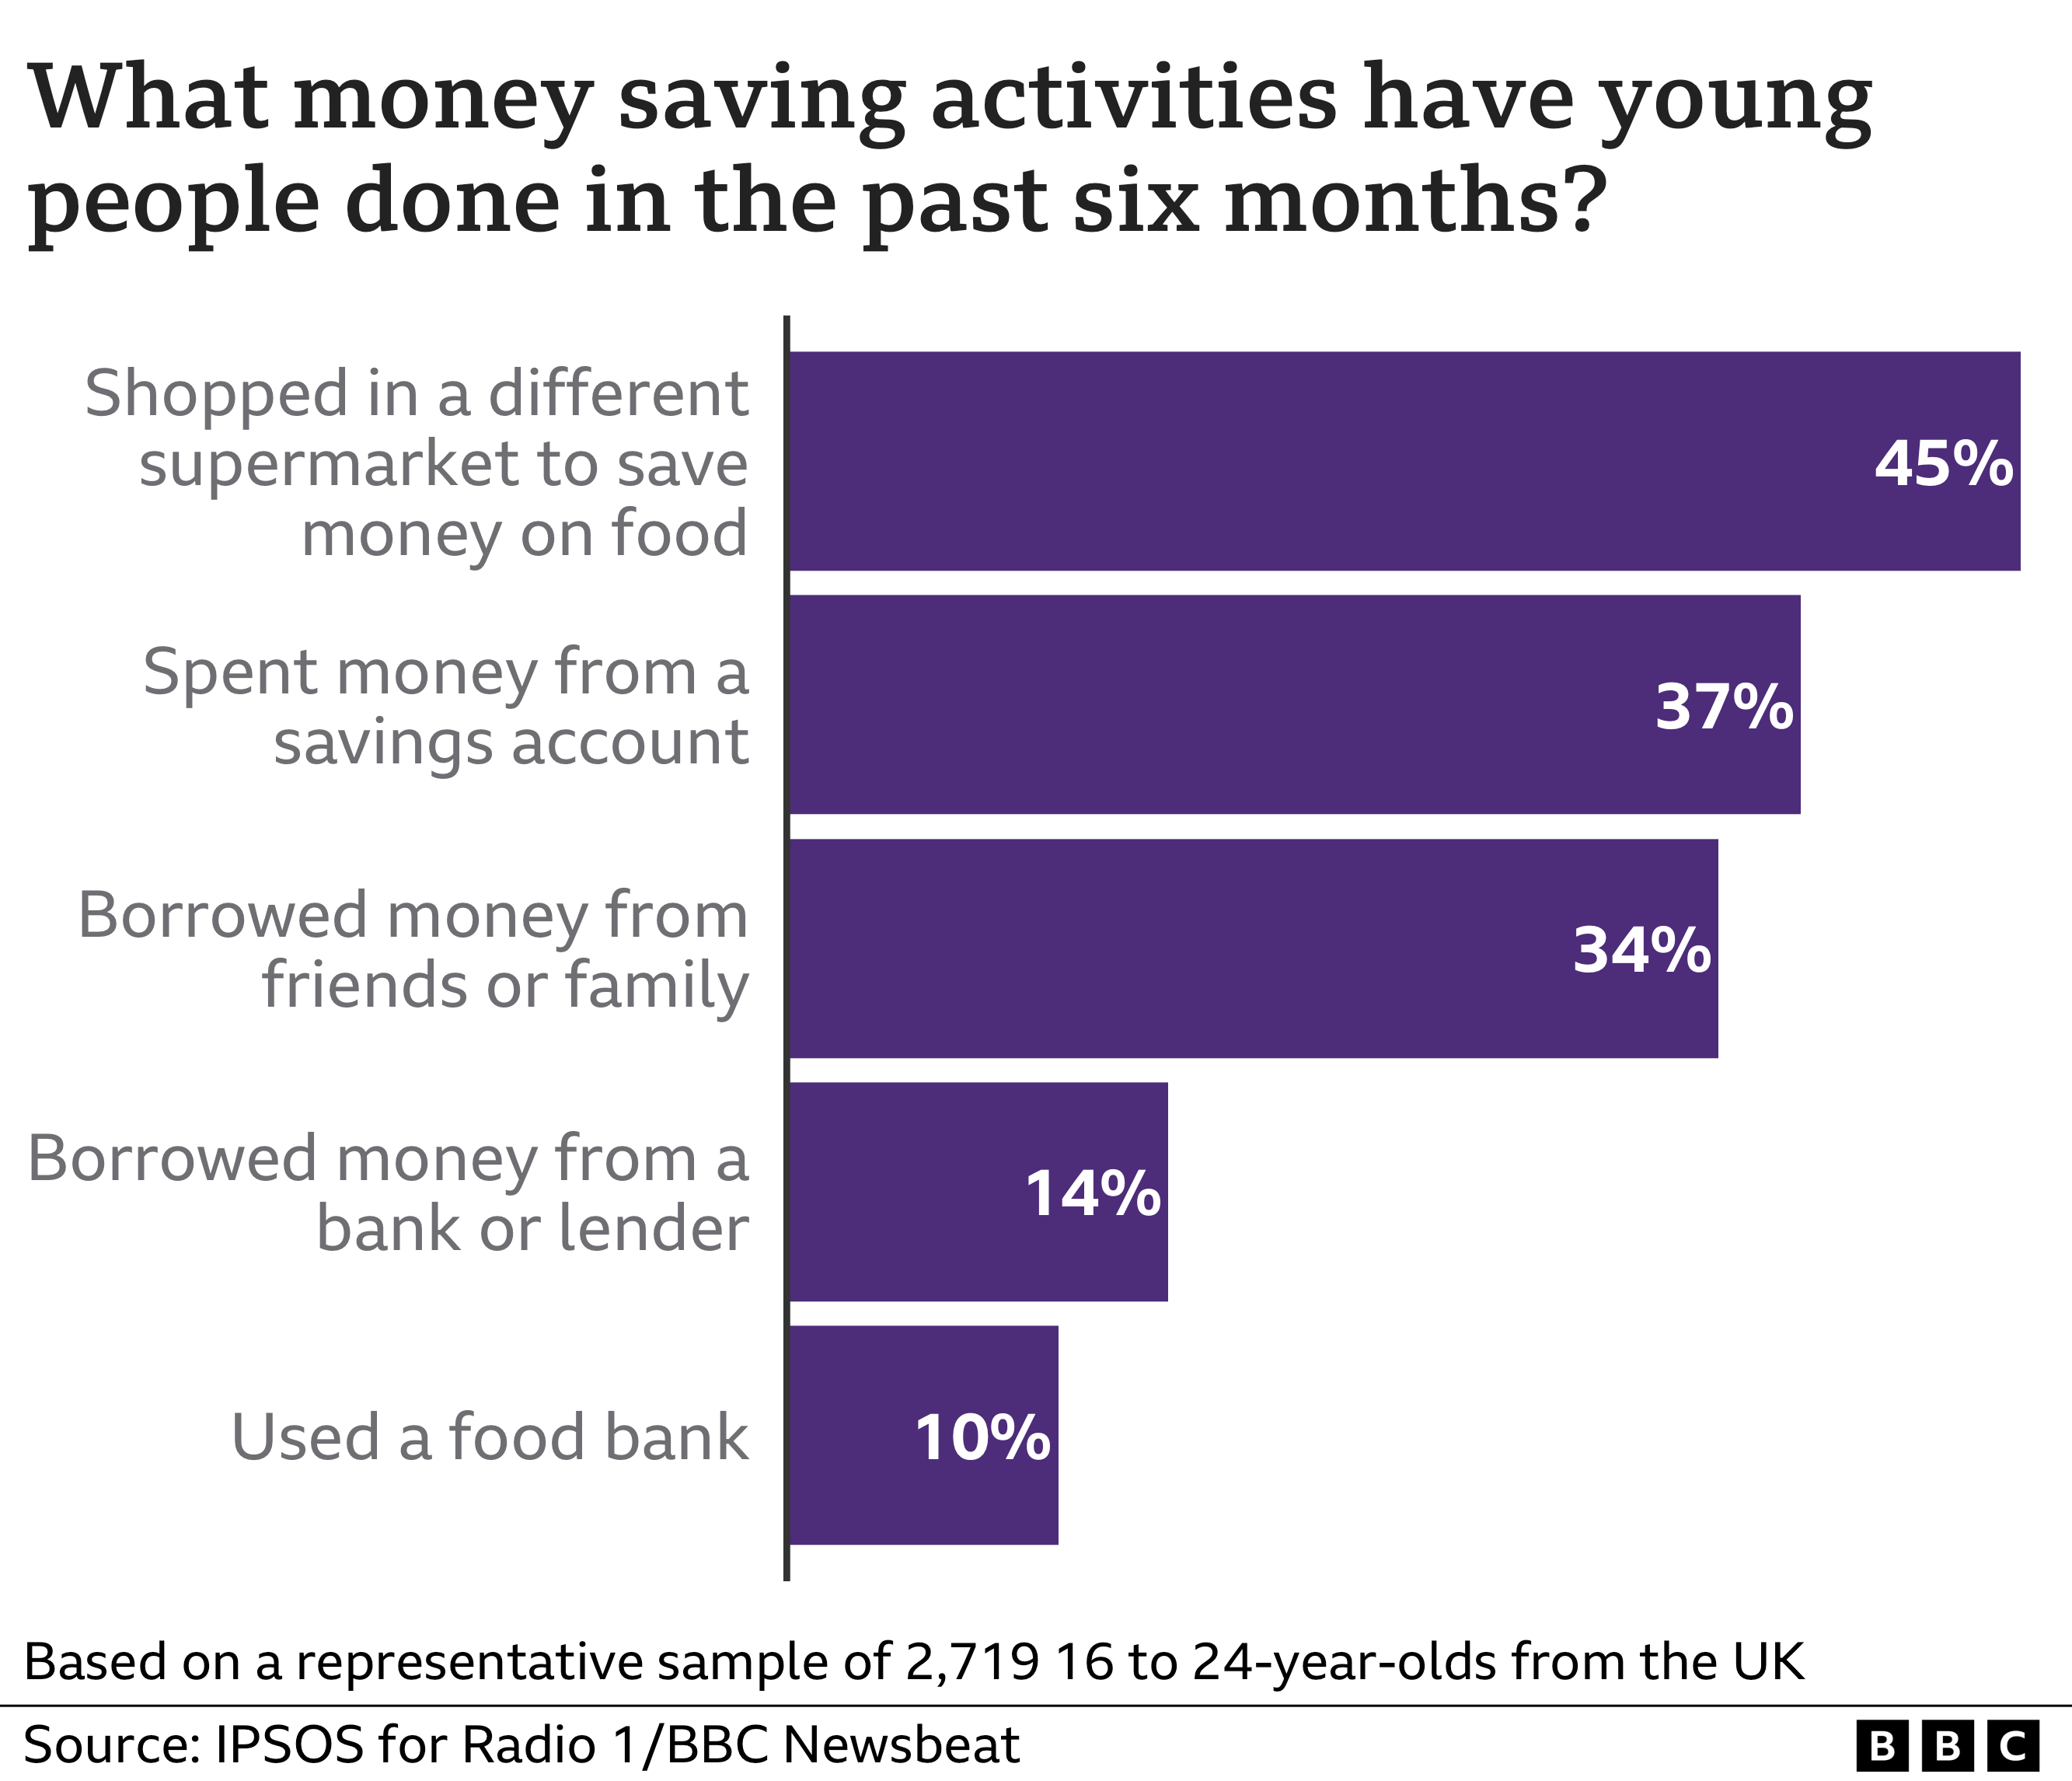 A chart showing money-saving activities people have done